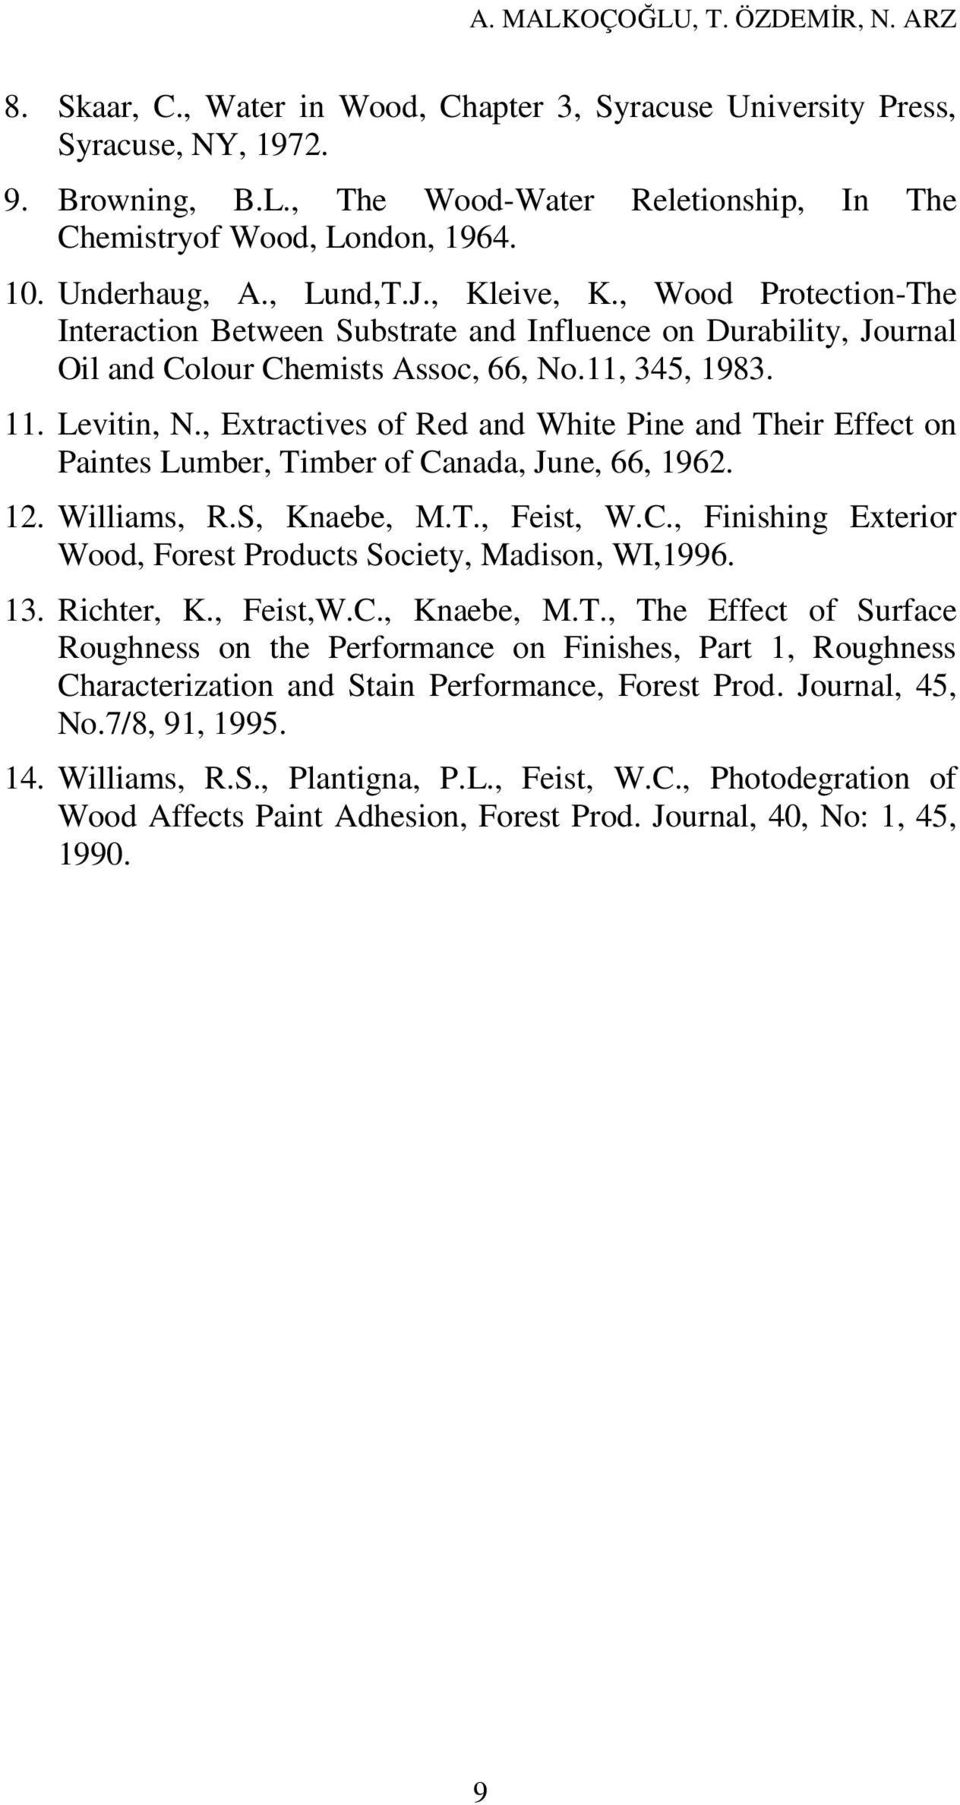 , Extractives of Red and White Pine and Their Effect on Paintes Lumber, Timber of Canada, June, 66, 1962. 12. Williams, R.S, Knaebe, M.T., Feist, W.C., Finishing Exterior Wood, Forest Products Society, Madison, WI,1996.